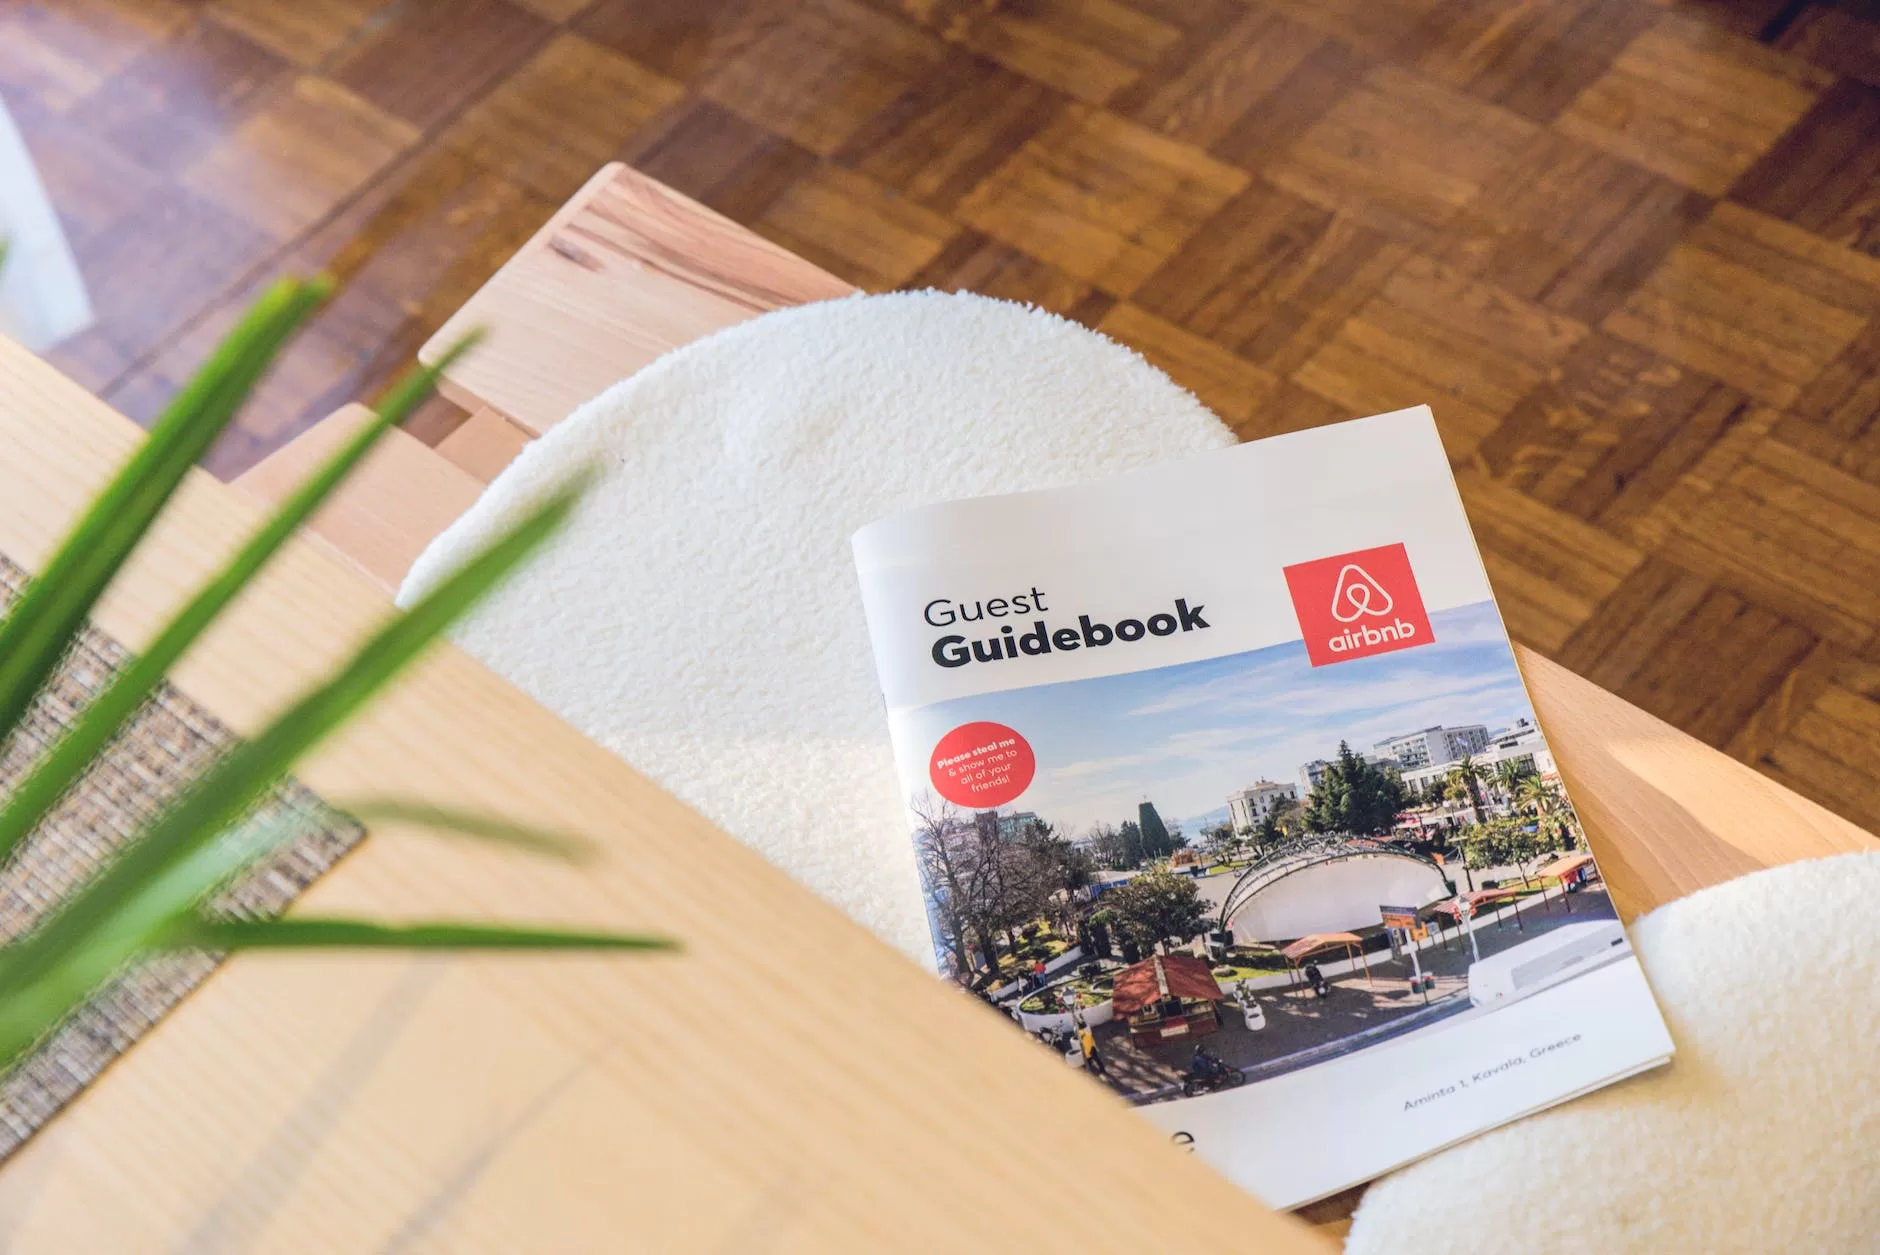 guest guidebook tips for new travelers